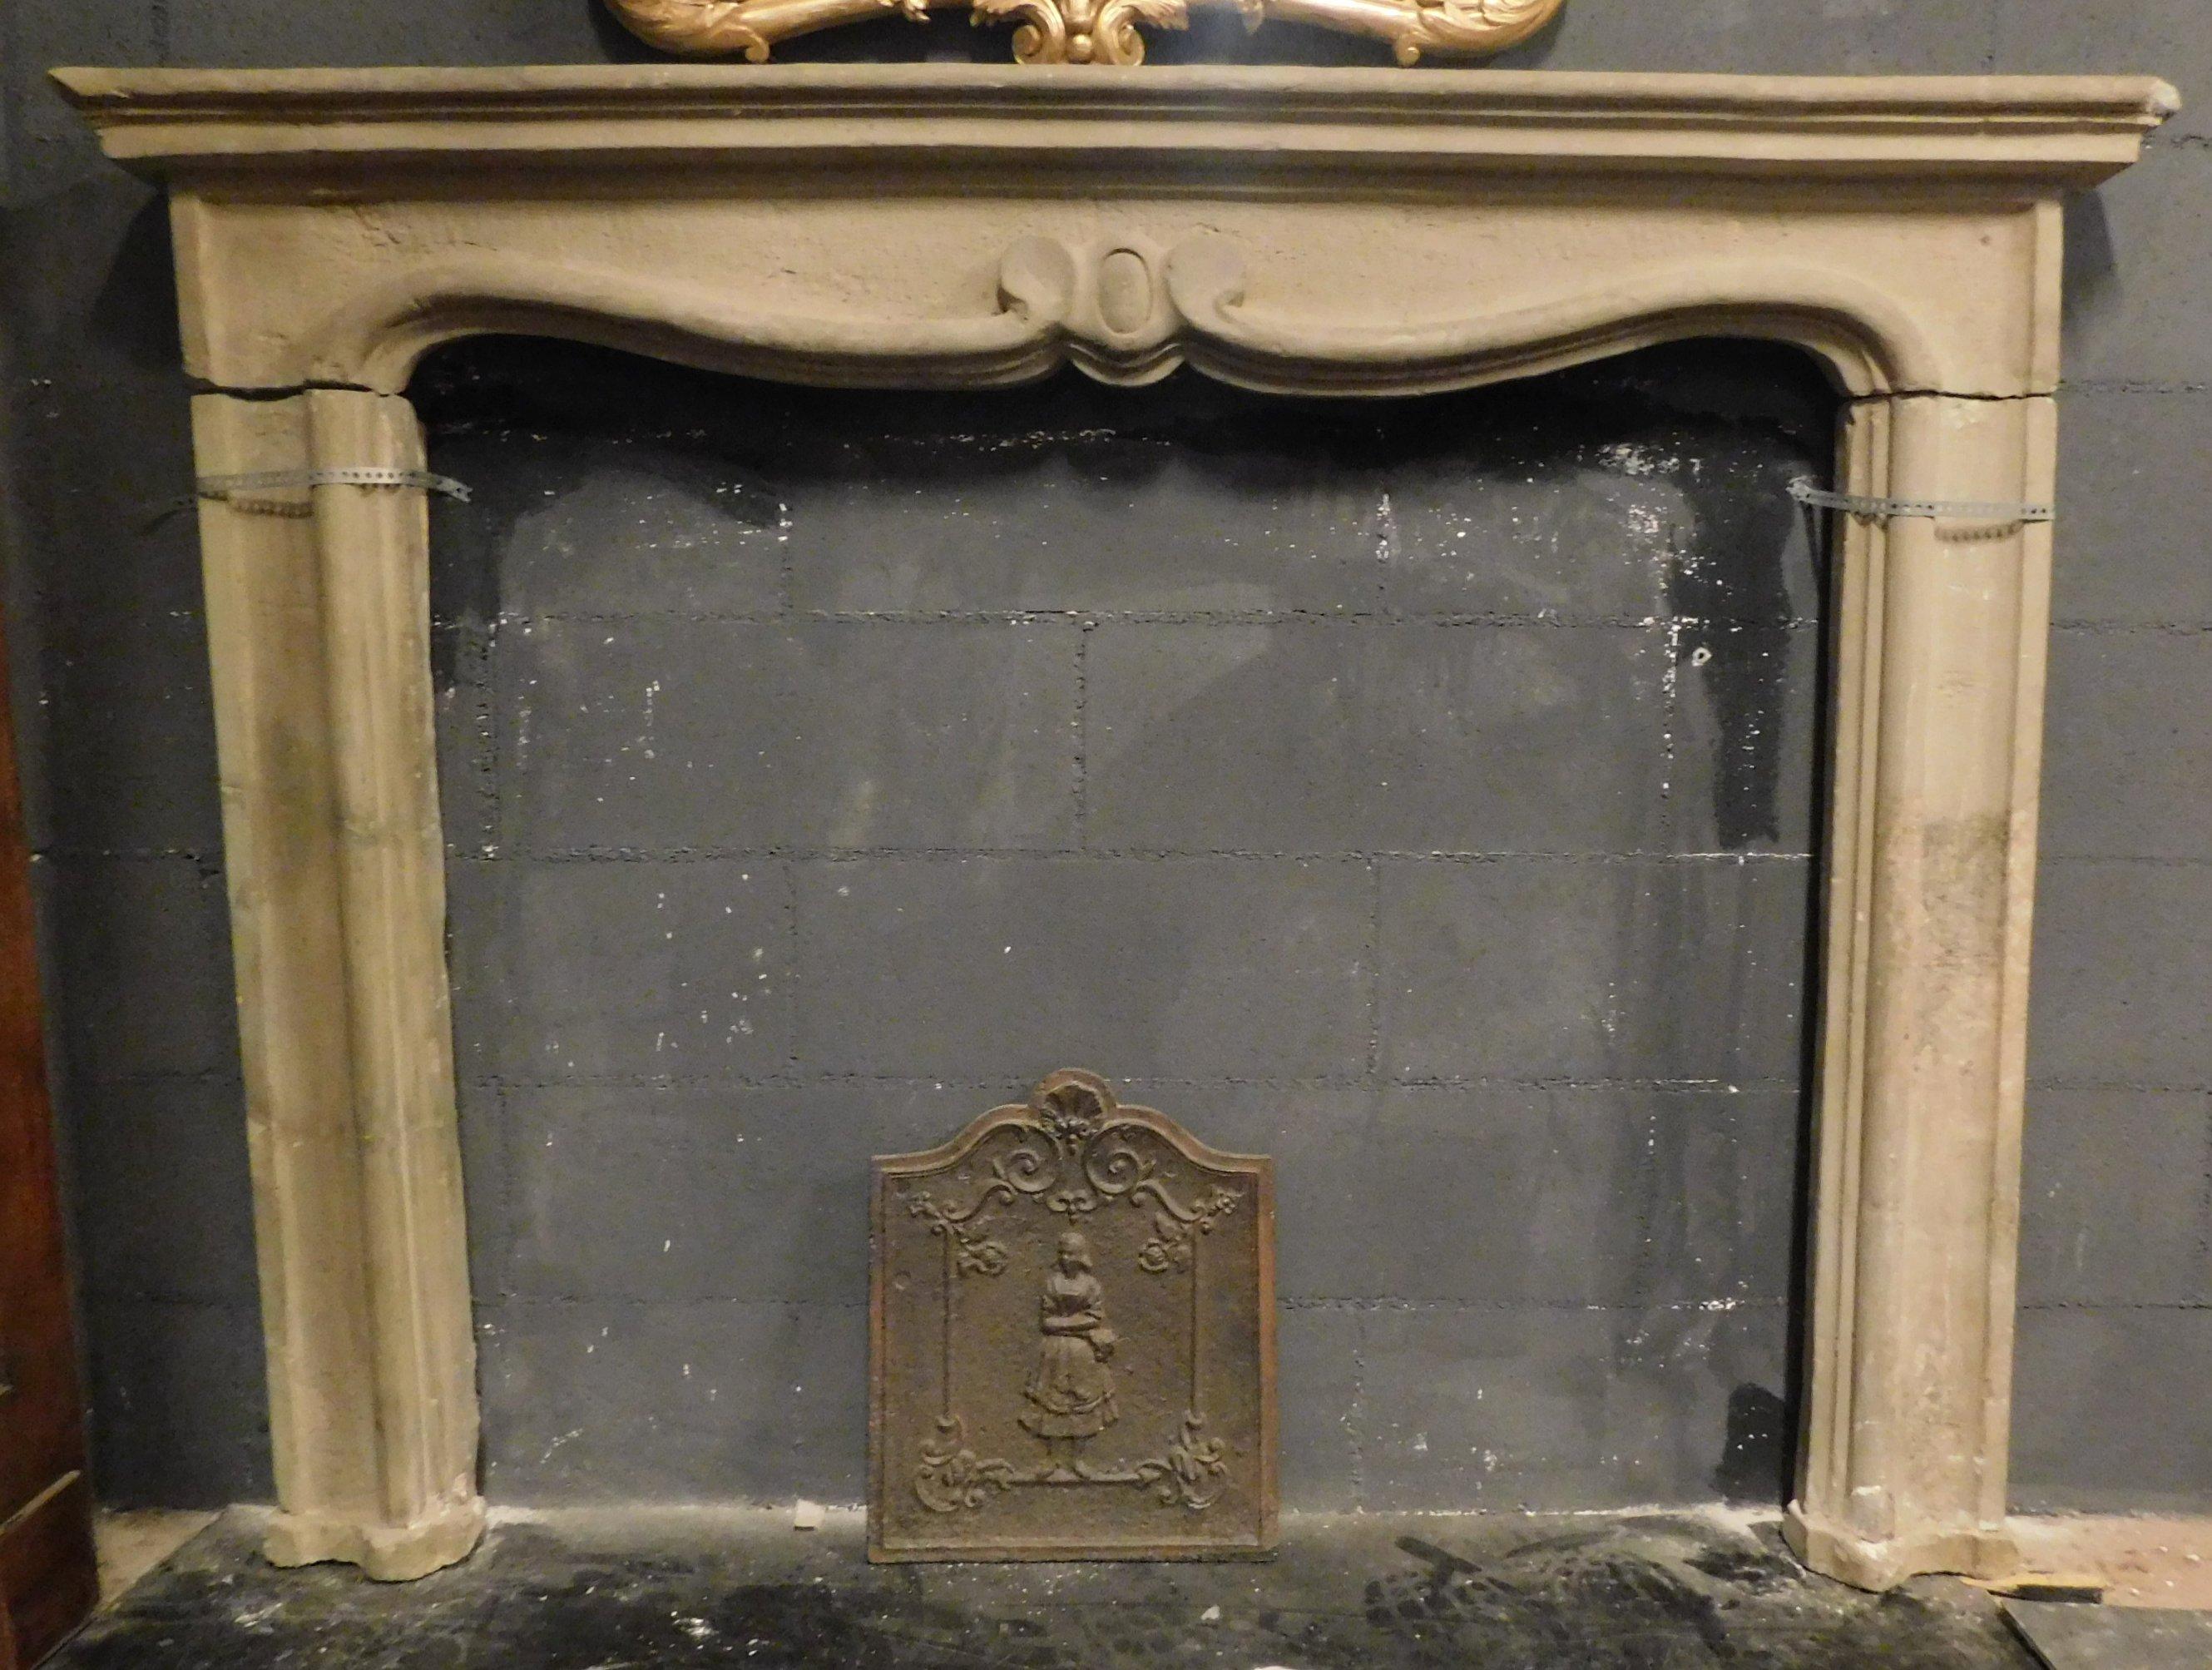 Hand-Carved Anctique carved fireplace mantle in Serena stone, 18th century Italy